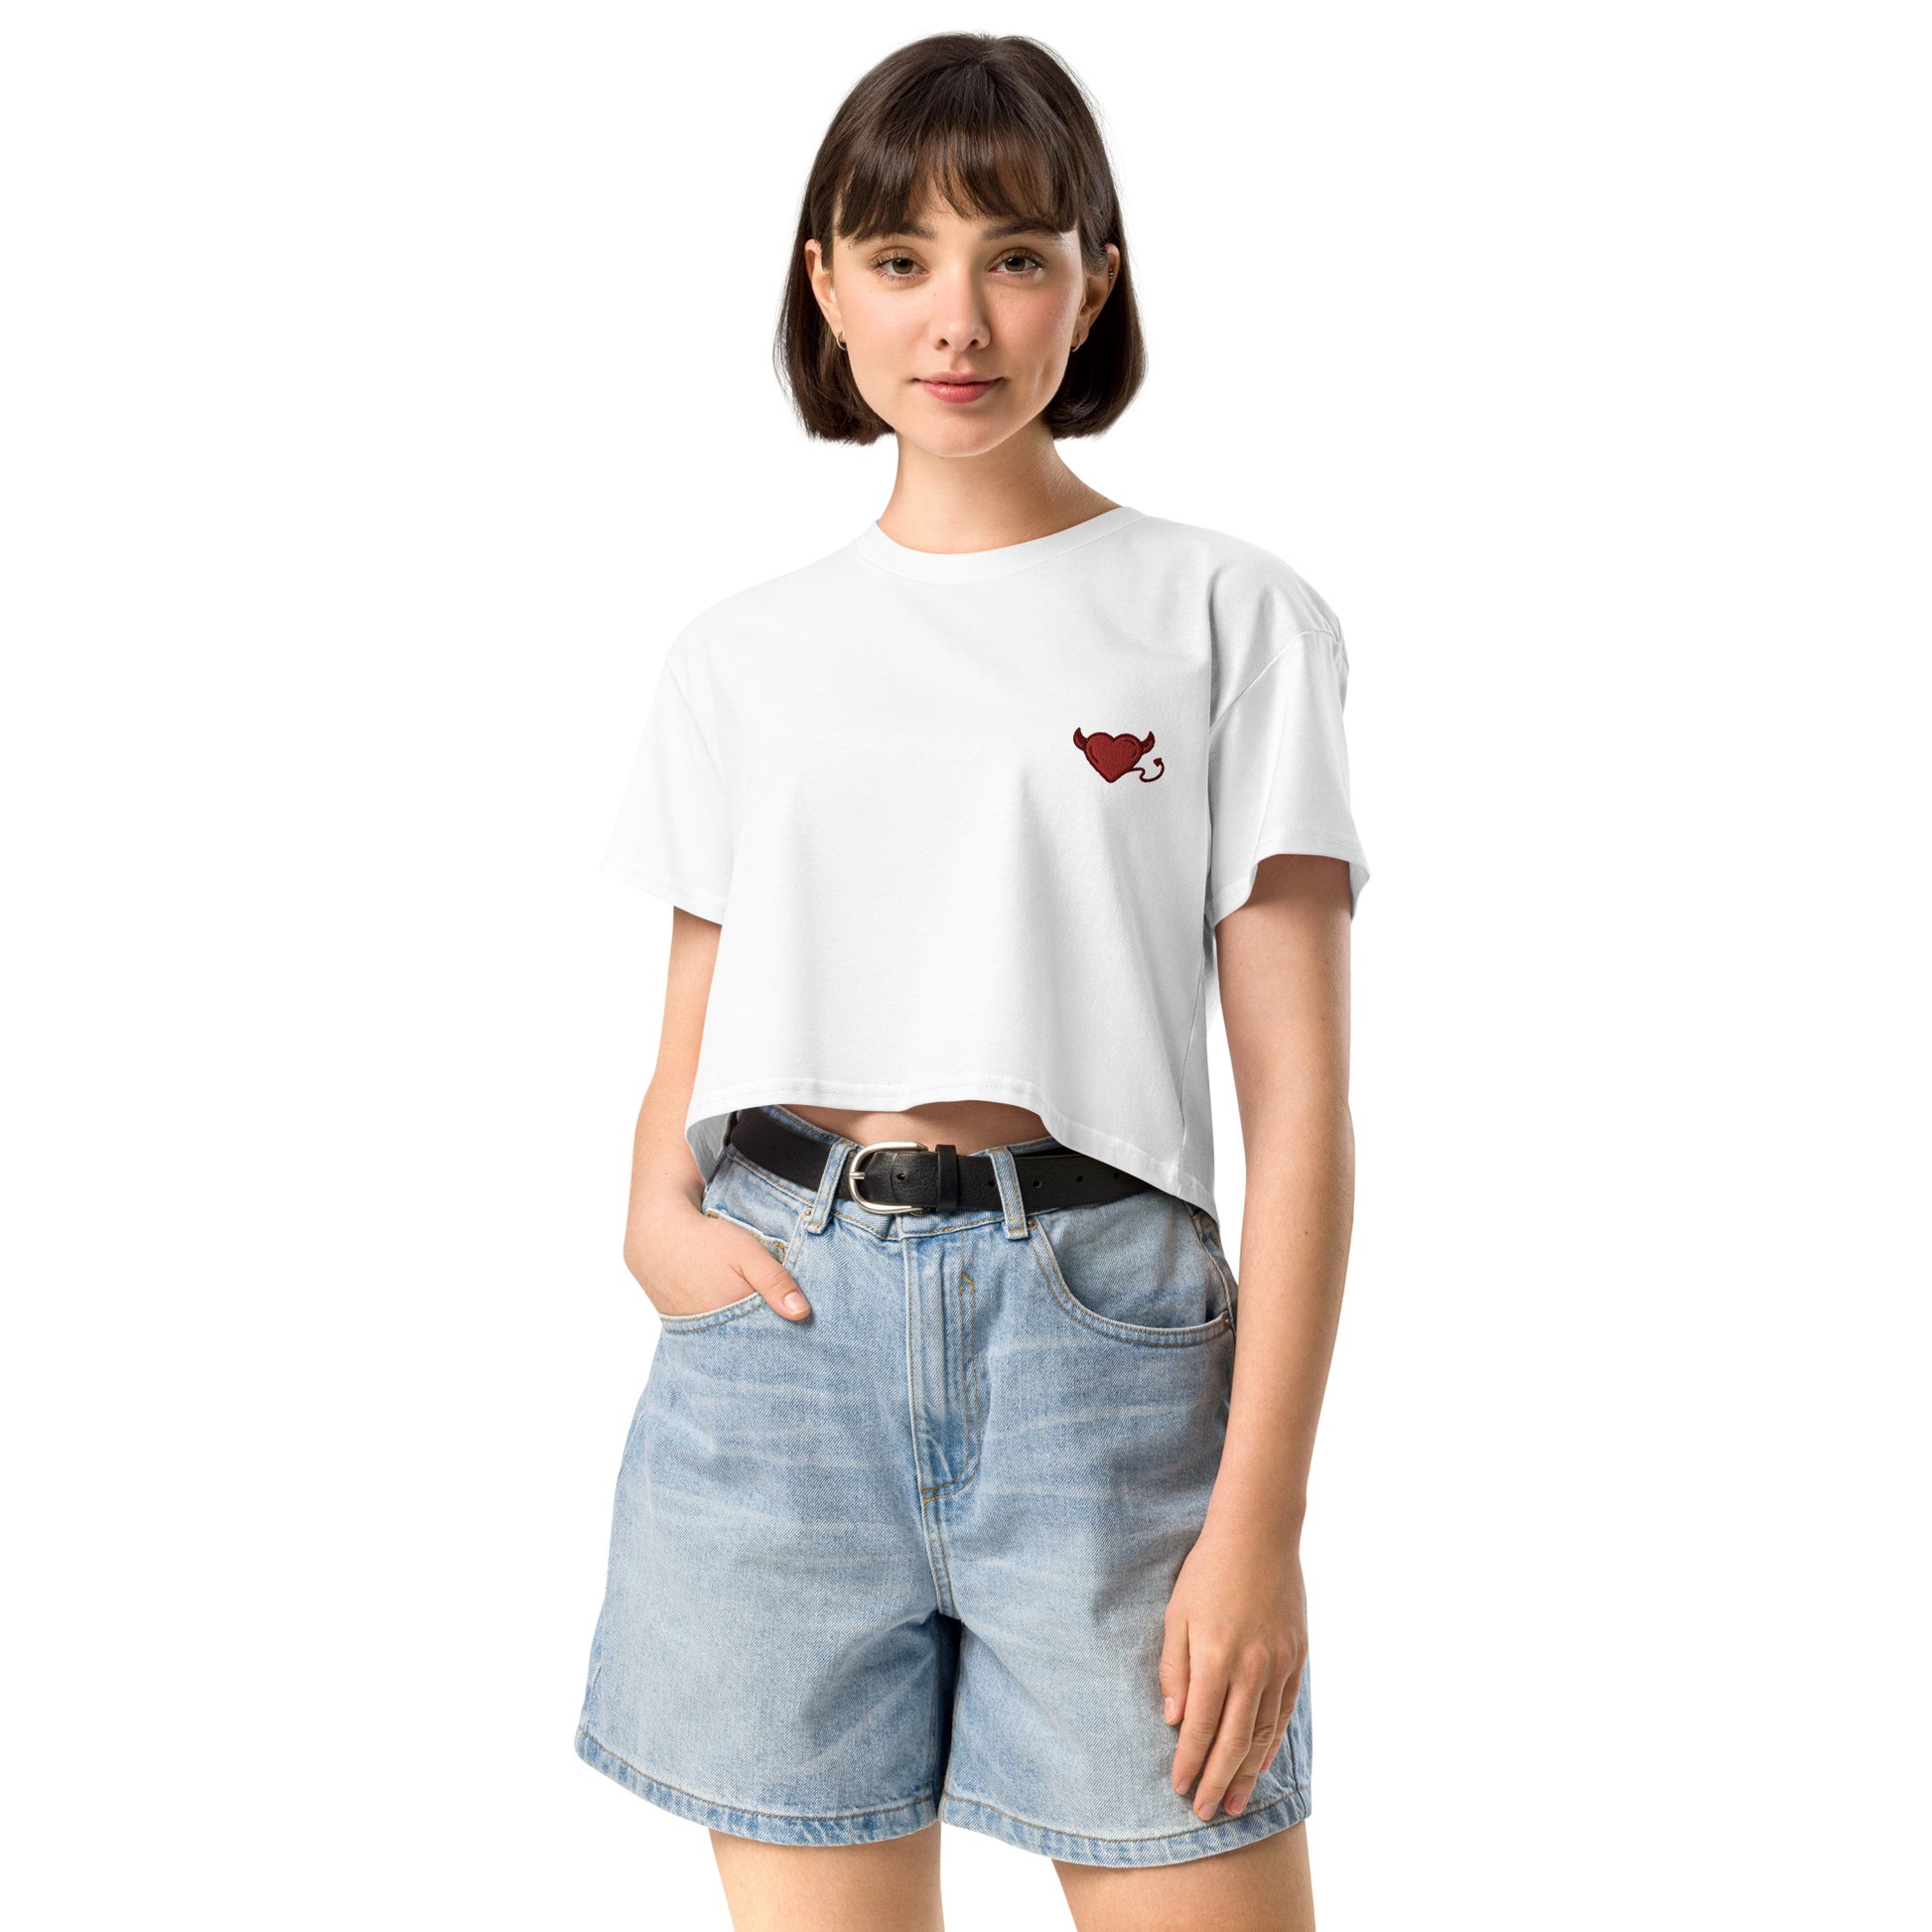 A female model wearing a relaxed, modest white crop top features a subtle red embroidery featuring a devil's heart. Adding a touch of mischief to your look—a playful celebration of lgbtq culture! Made from 100% combed cotton. Available in Extra Small, Small, Medium, Large, Extra Large.